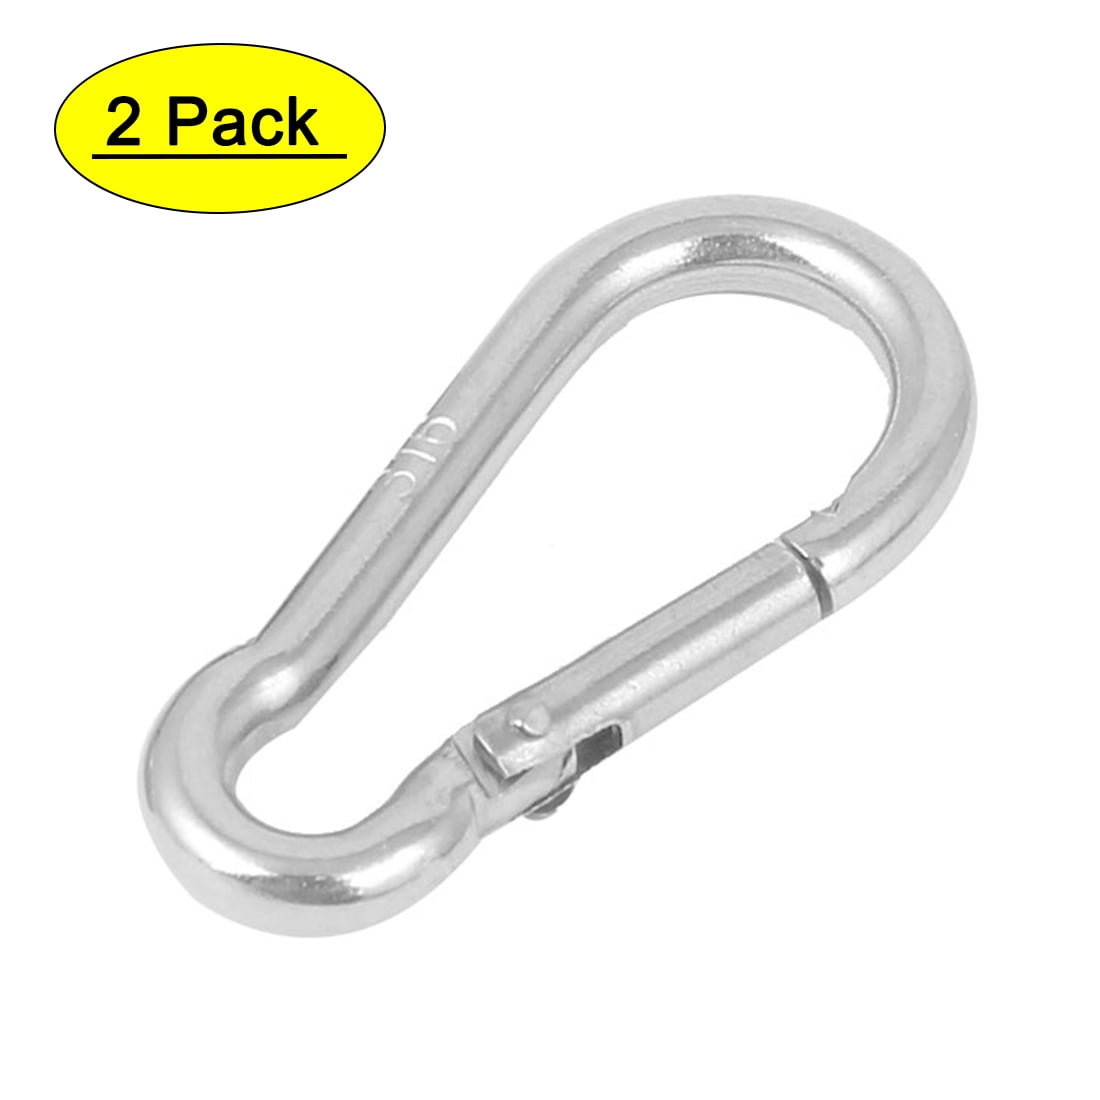 Silver Tone 304 Stainless Steel Quick Link Lock Ring Carabiner M6 Set of 10 